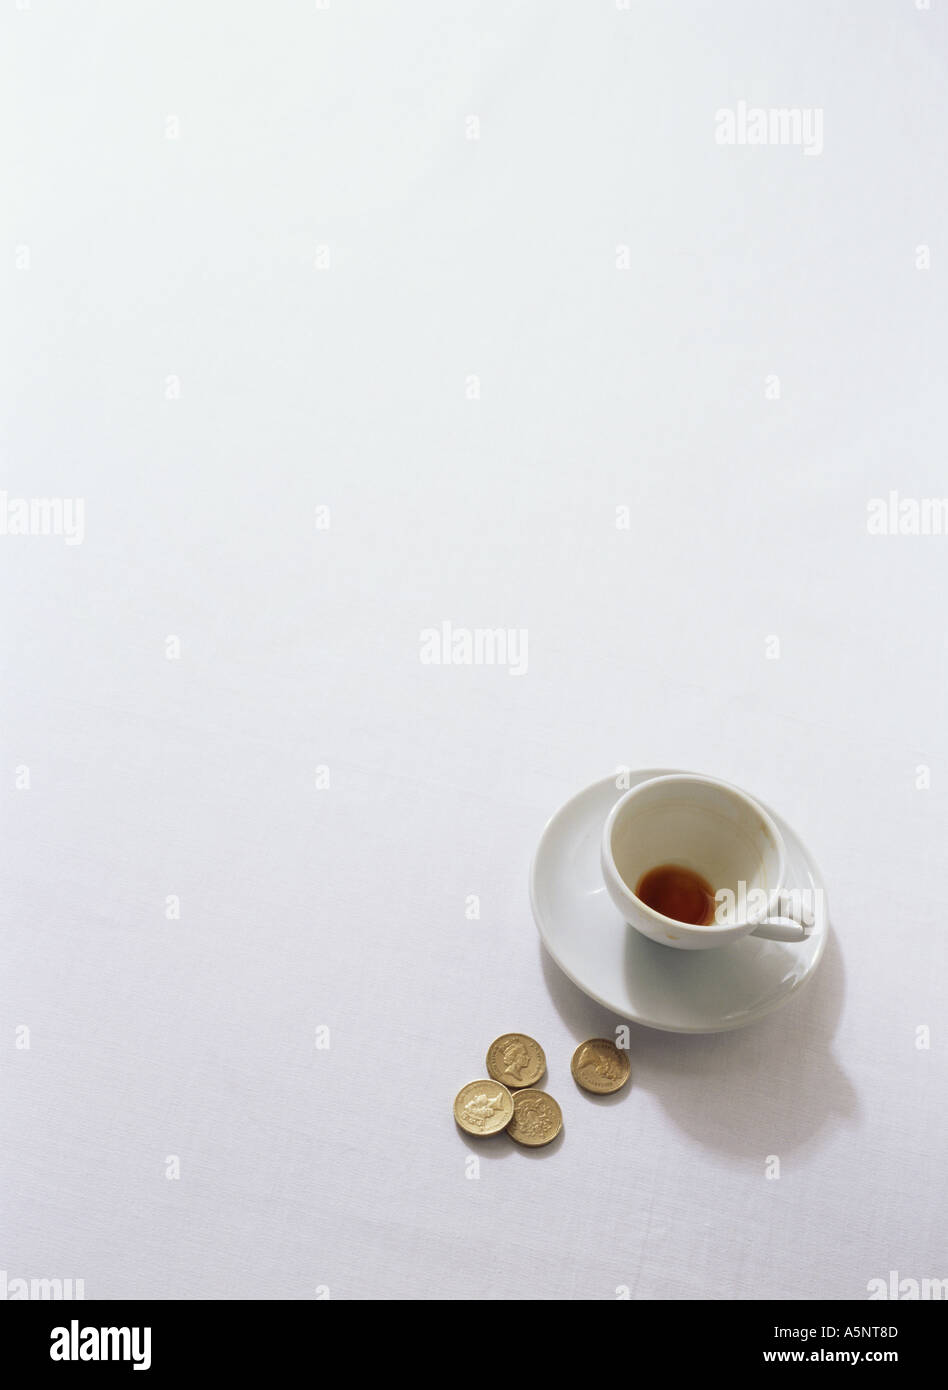 An empty cup of coffee and coins on table Stock Photo